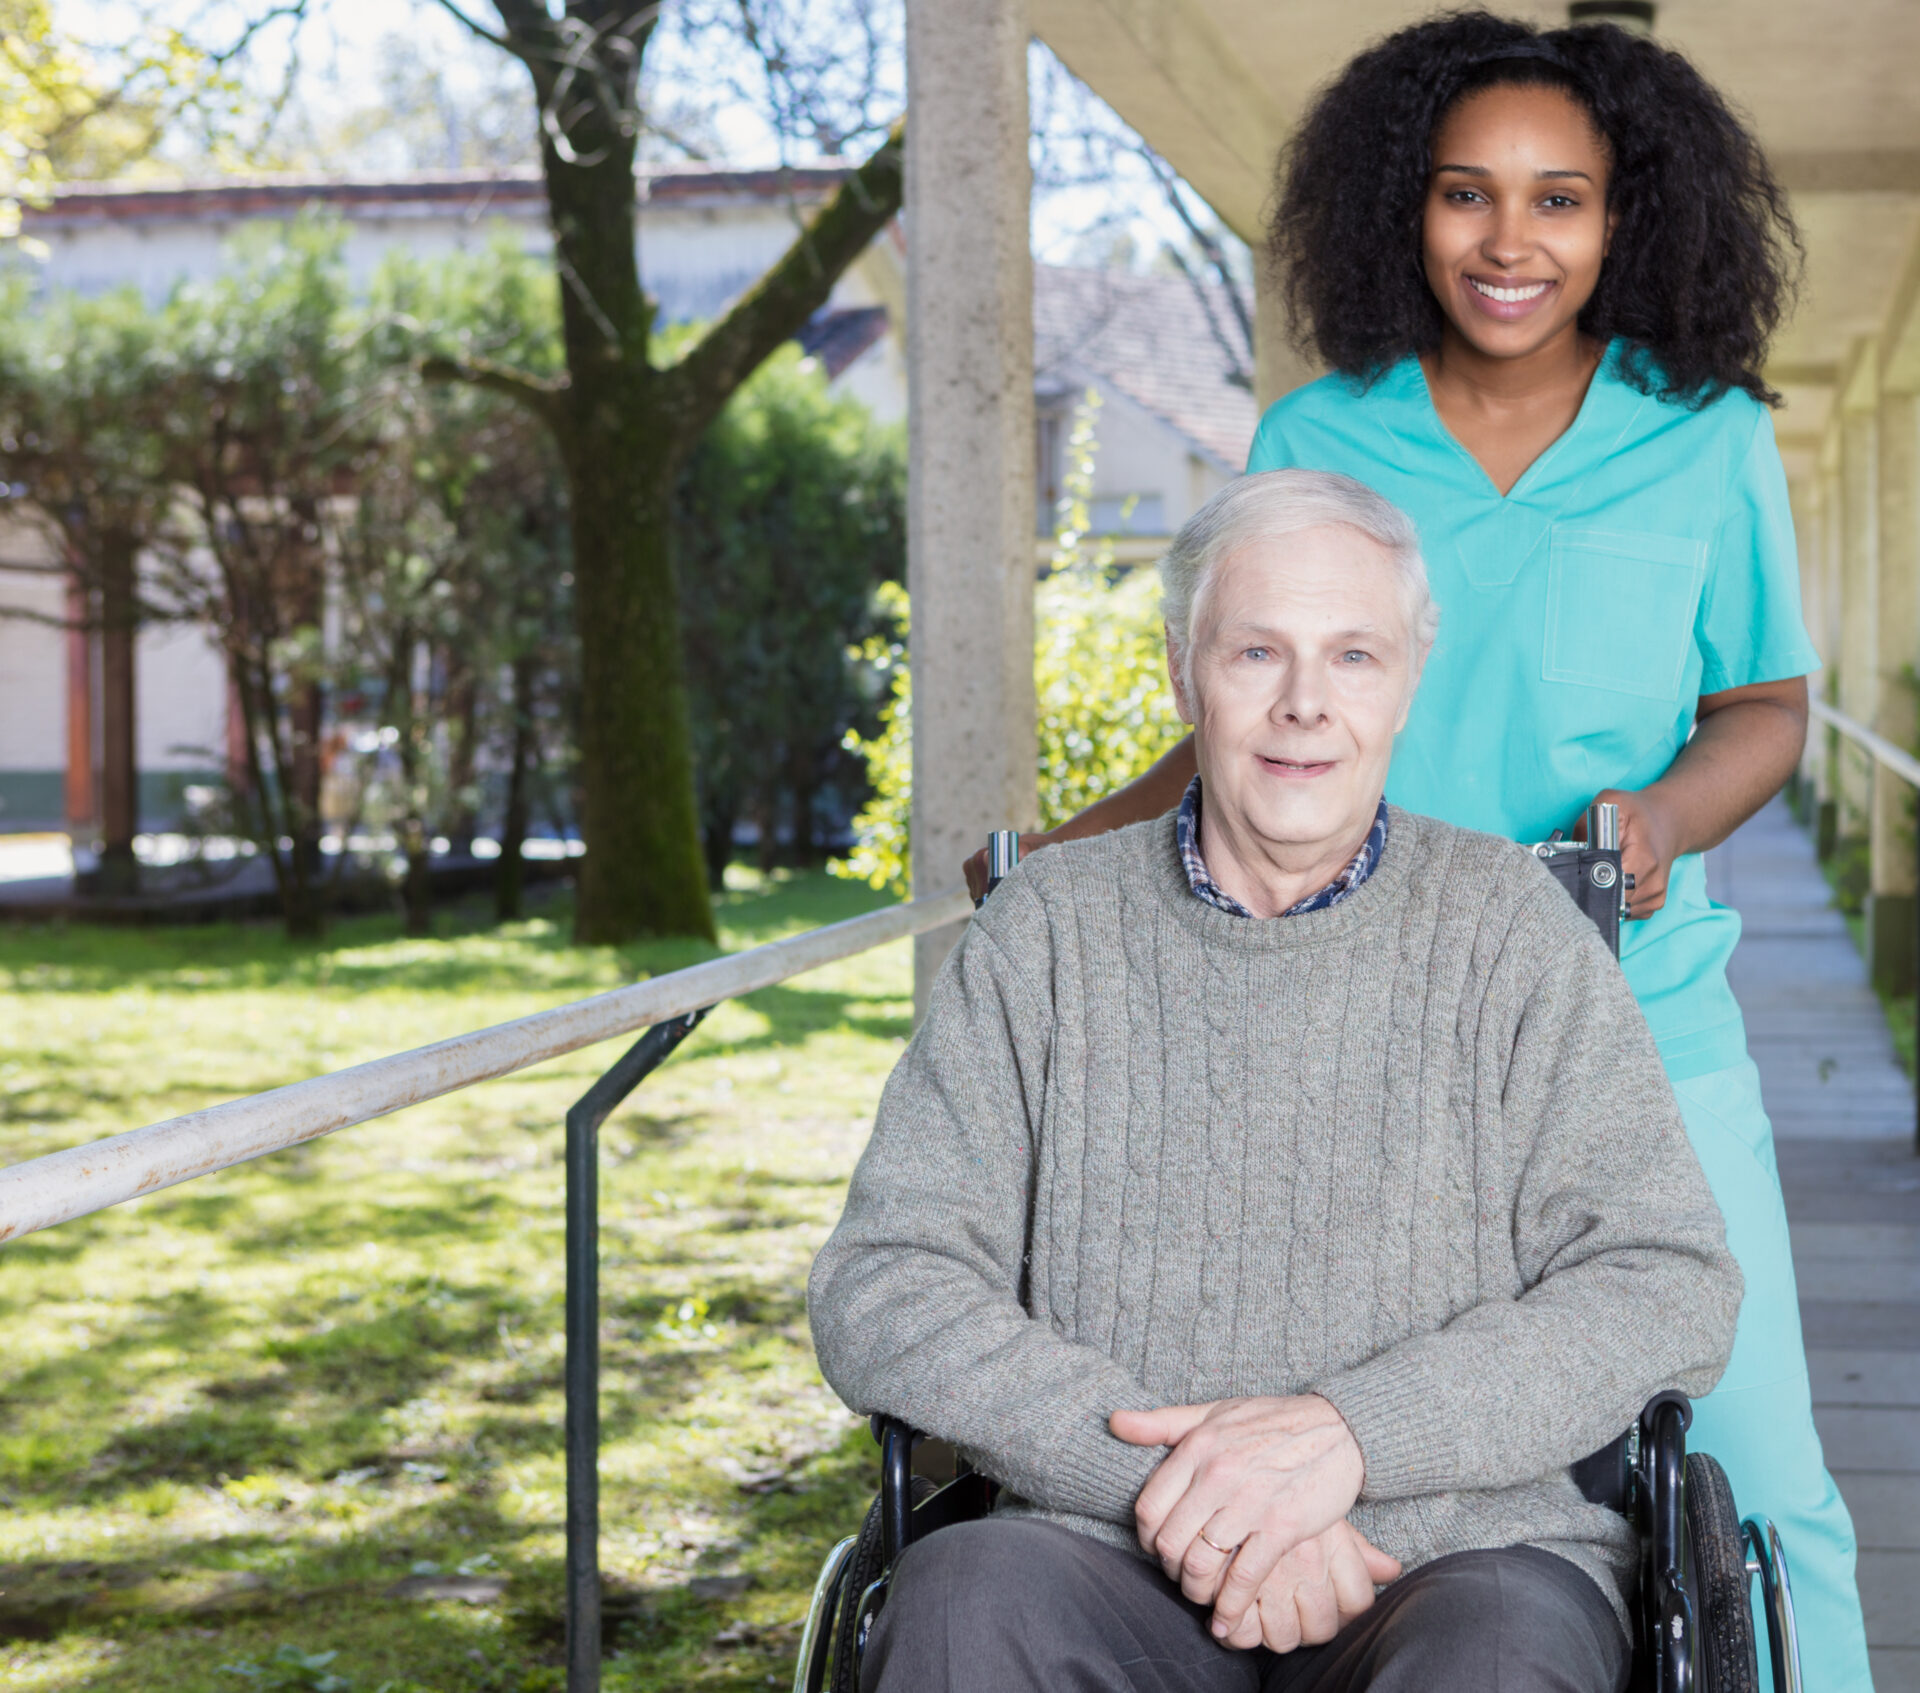 A woman standing next to an older man in a wheelchair.